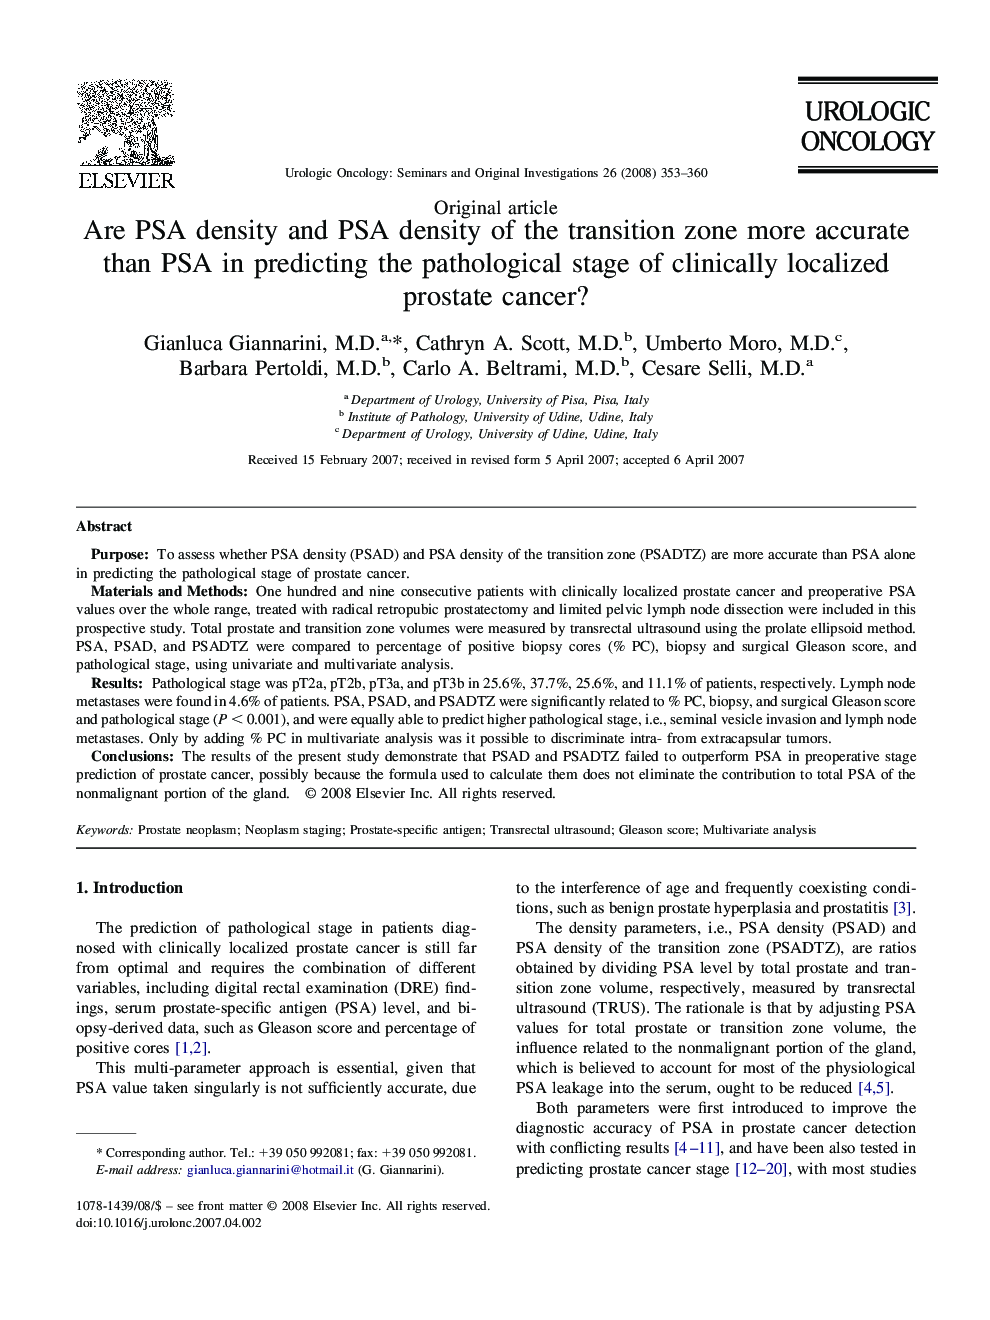 Are PSA density and PSA density of the transition zone more accurate than PSA in predicting the pathological stage of clinically localized prostate cancer?